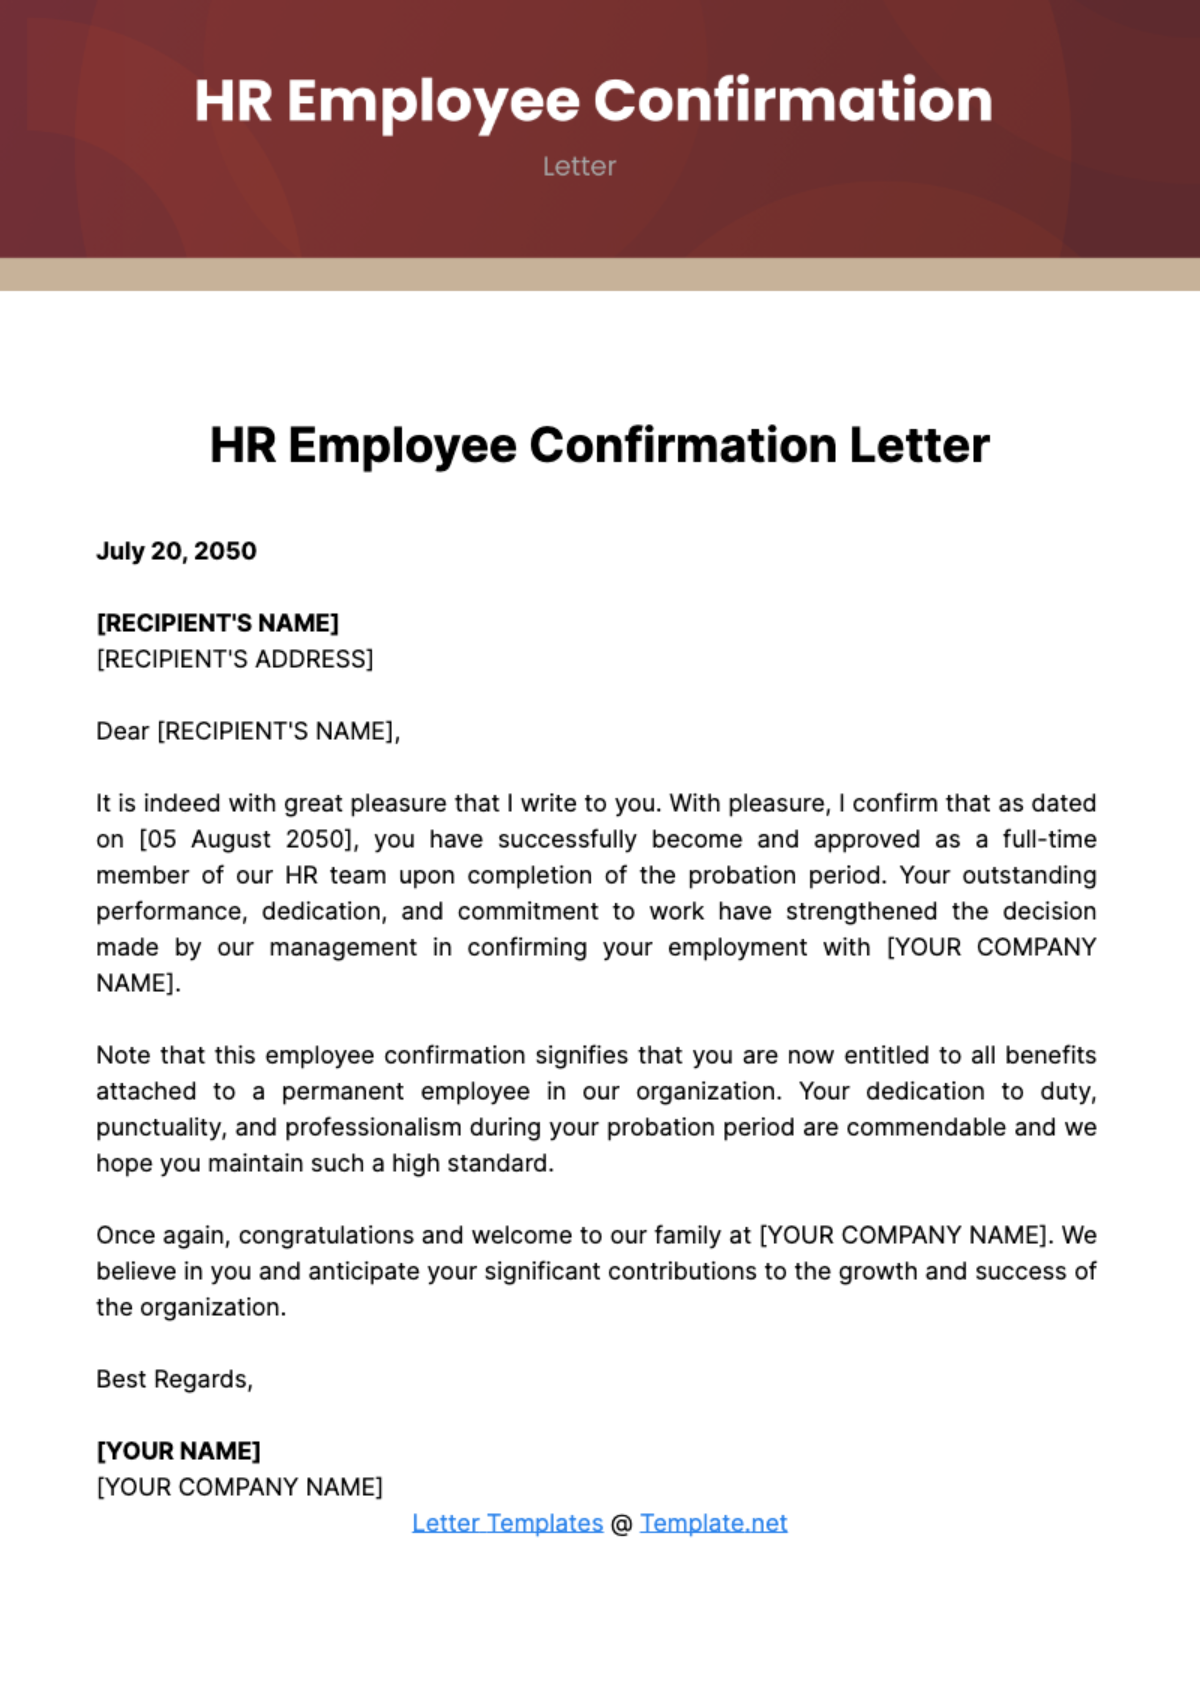 Free HR Employee Confirmation Letter Template